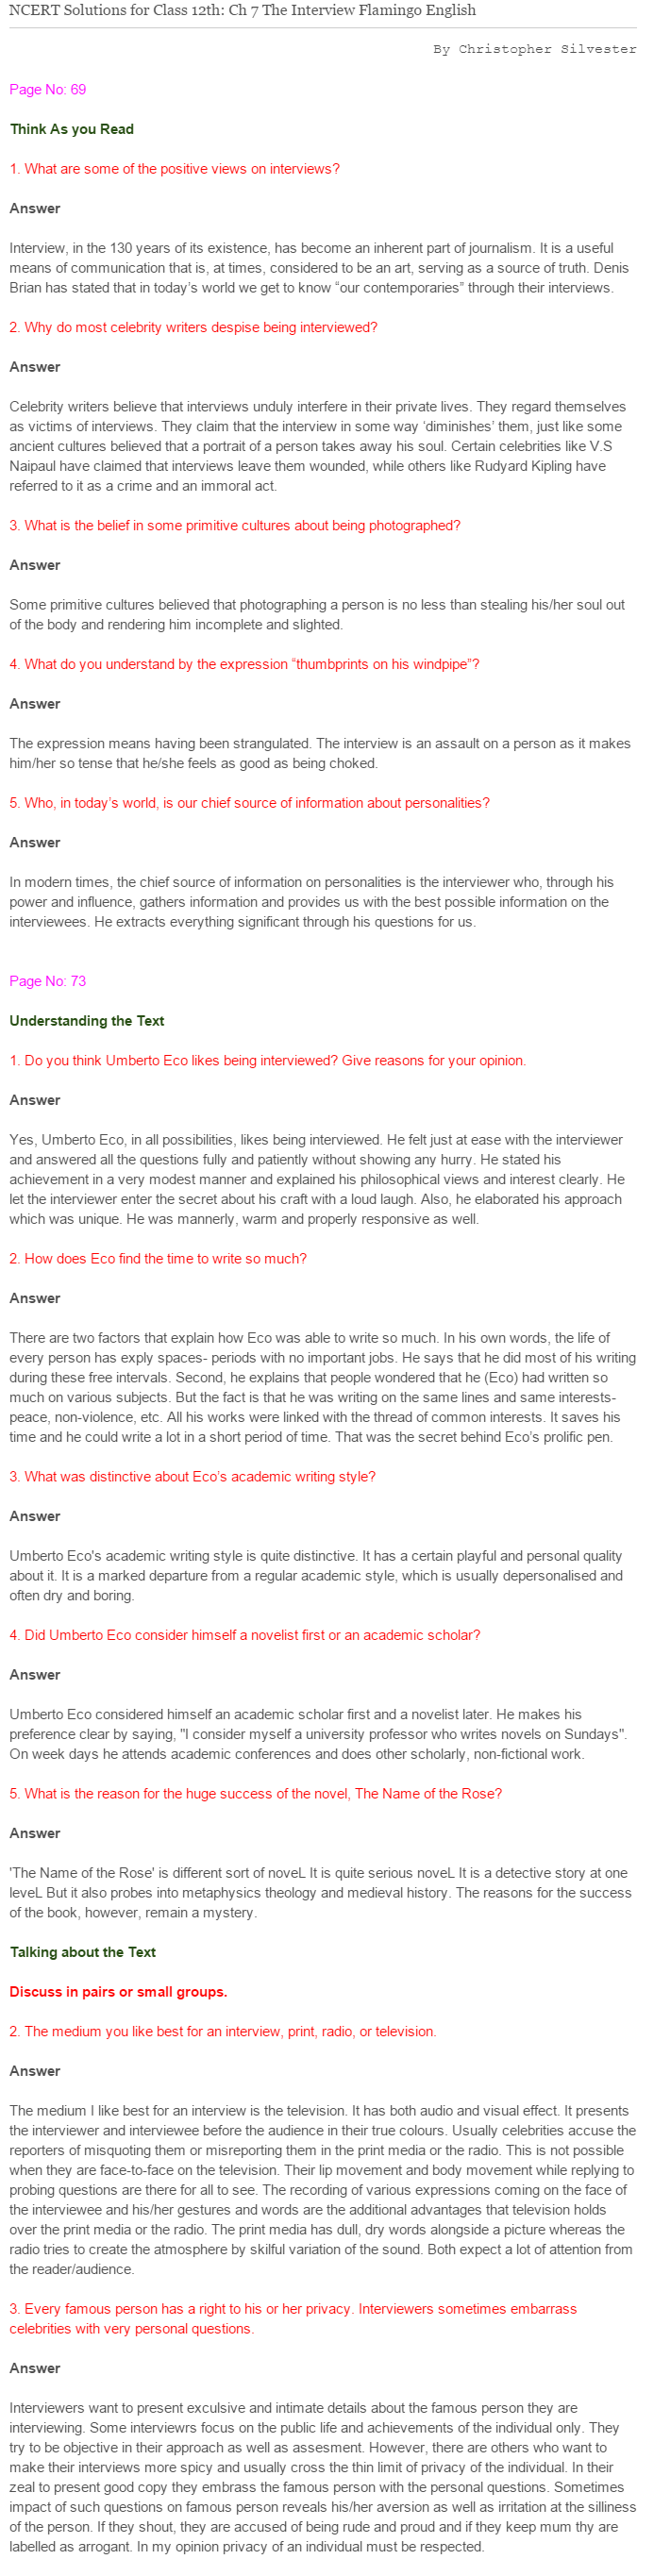 NCERT-Solutions-For-Class-12-Flamingo-English-The-Interview